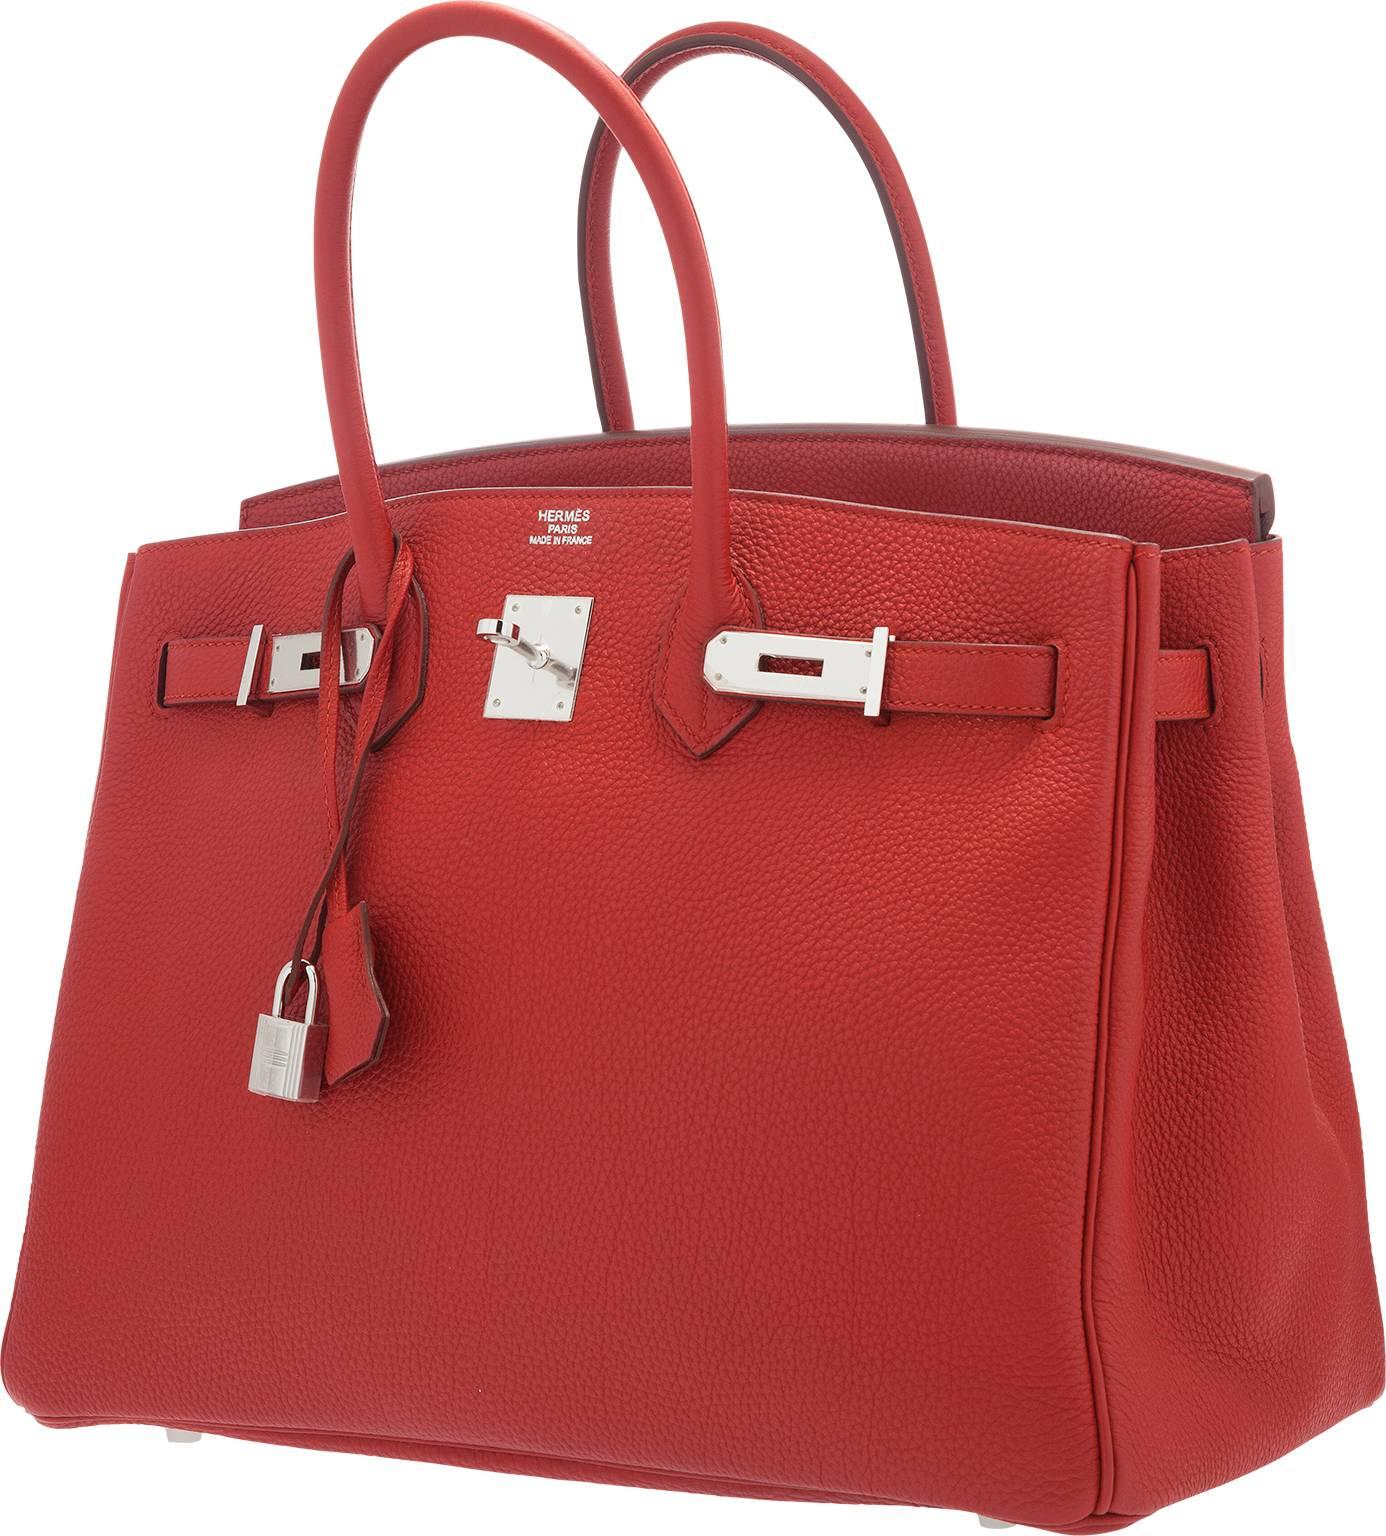 The Birkin is one of the most sought after bags in history. Designed for Jane Birkin in the 1980's, the Birkin has maintained its elegance and allure. Due to its unsurpassed functionality, quality, lasting value, and practicality, the Birkin could